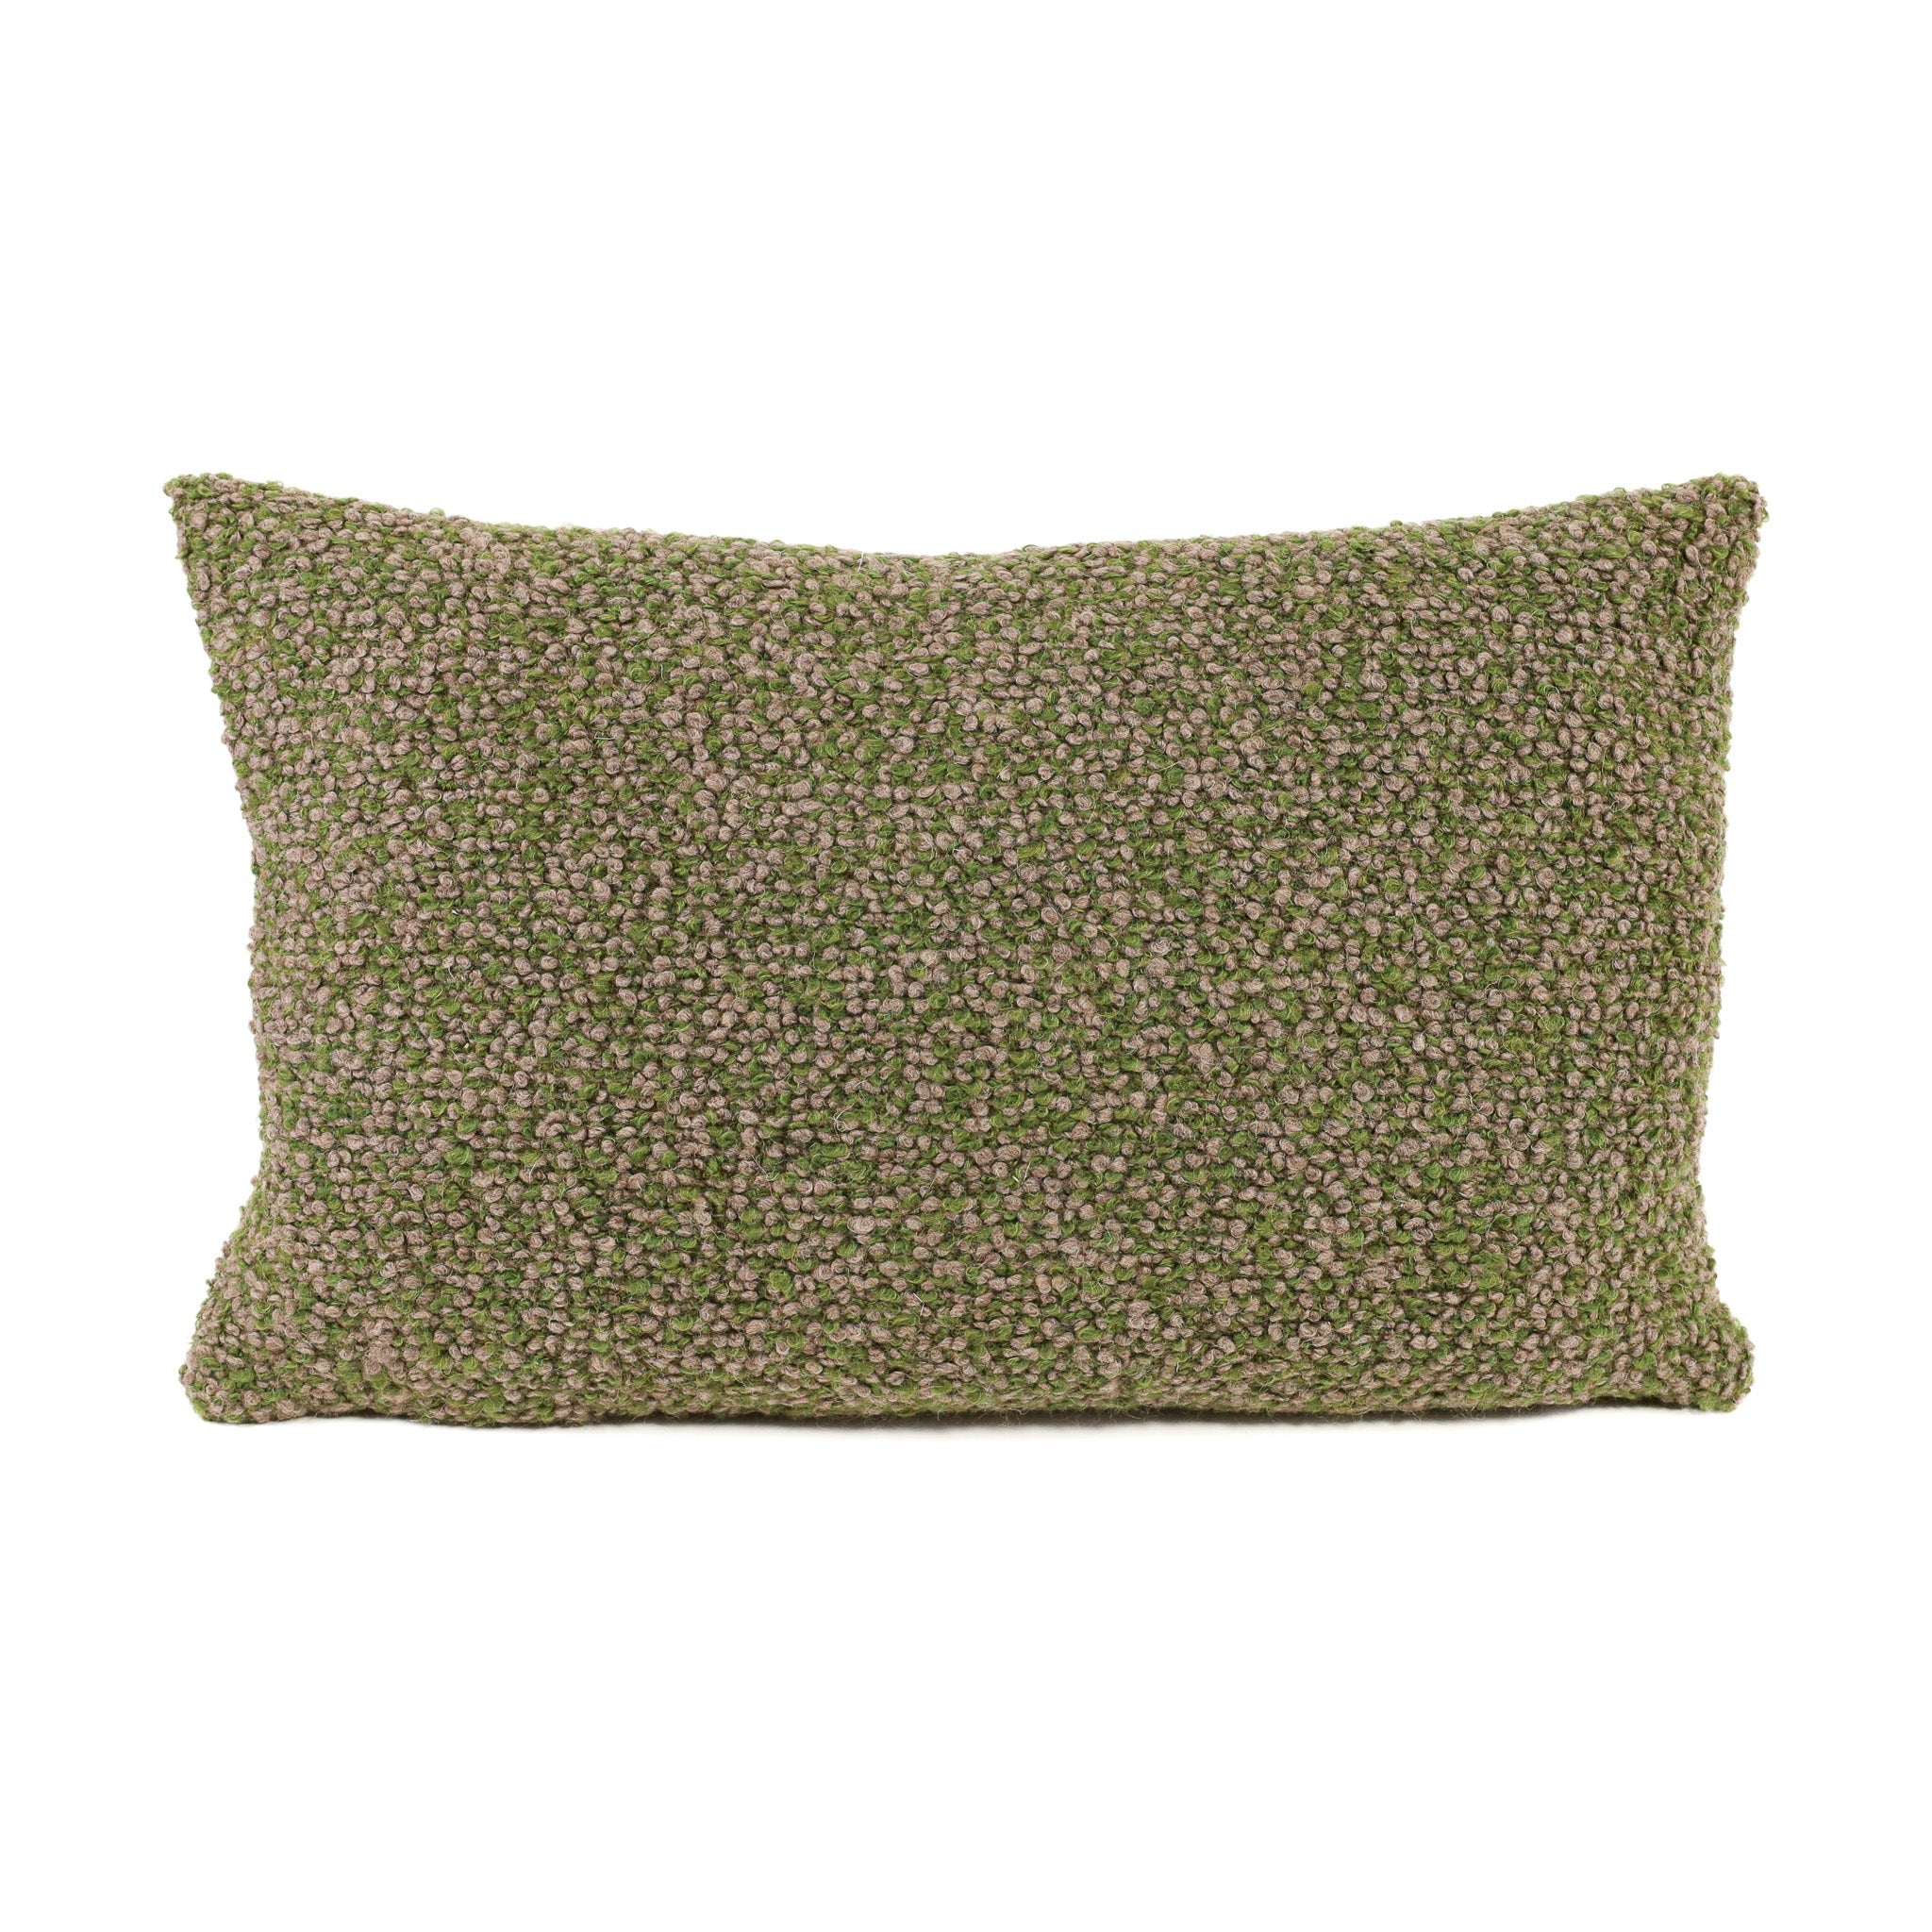 kahlo pillow by uniquity at adorn.house